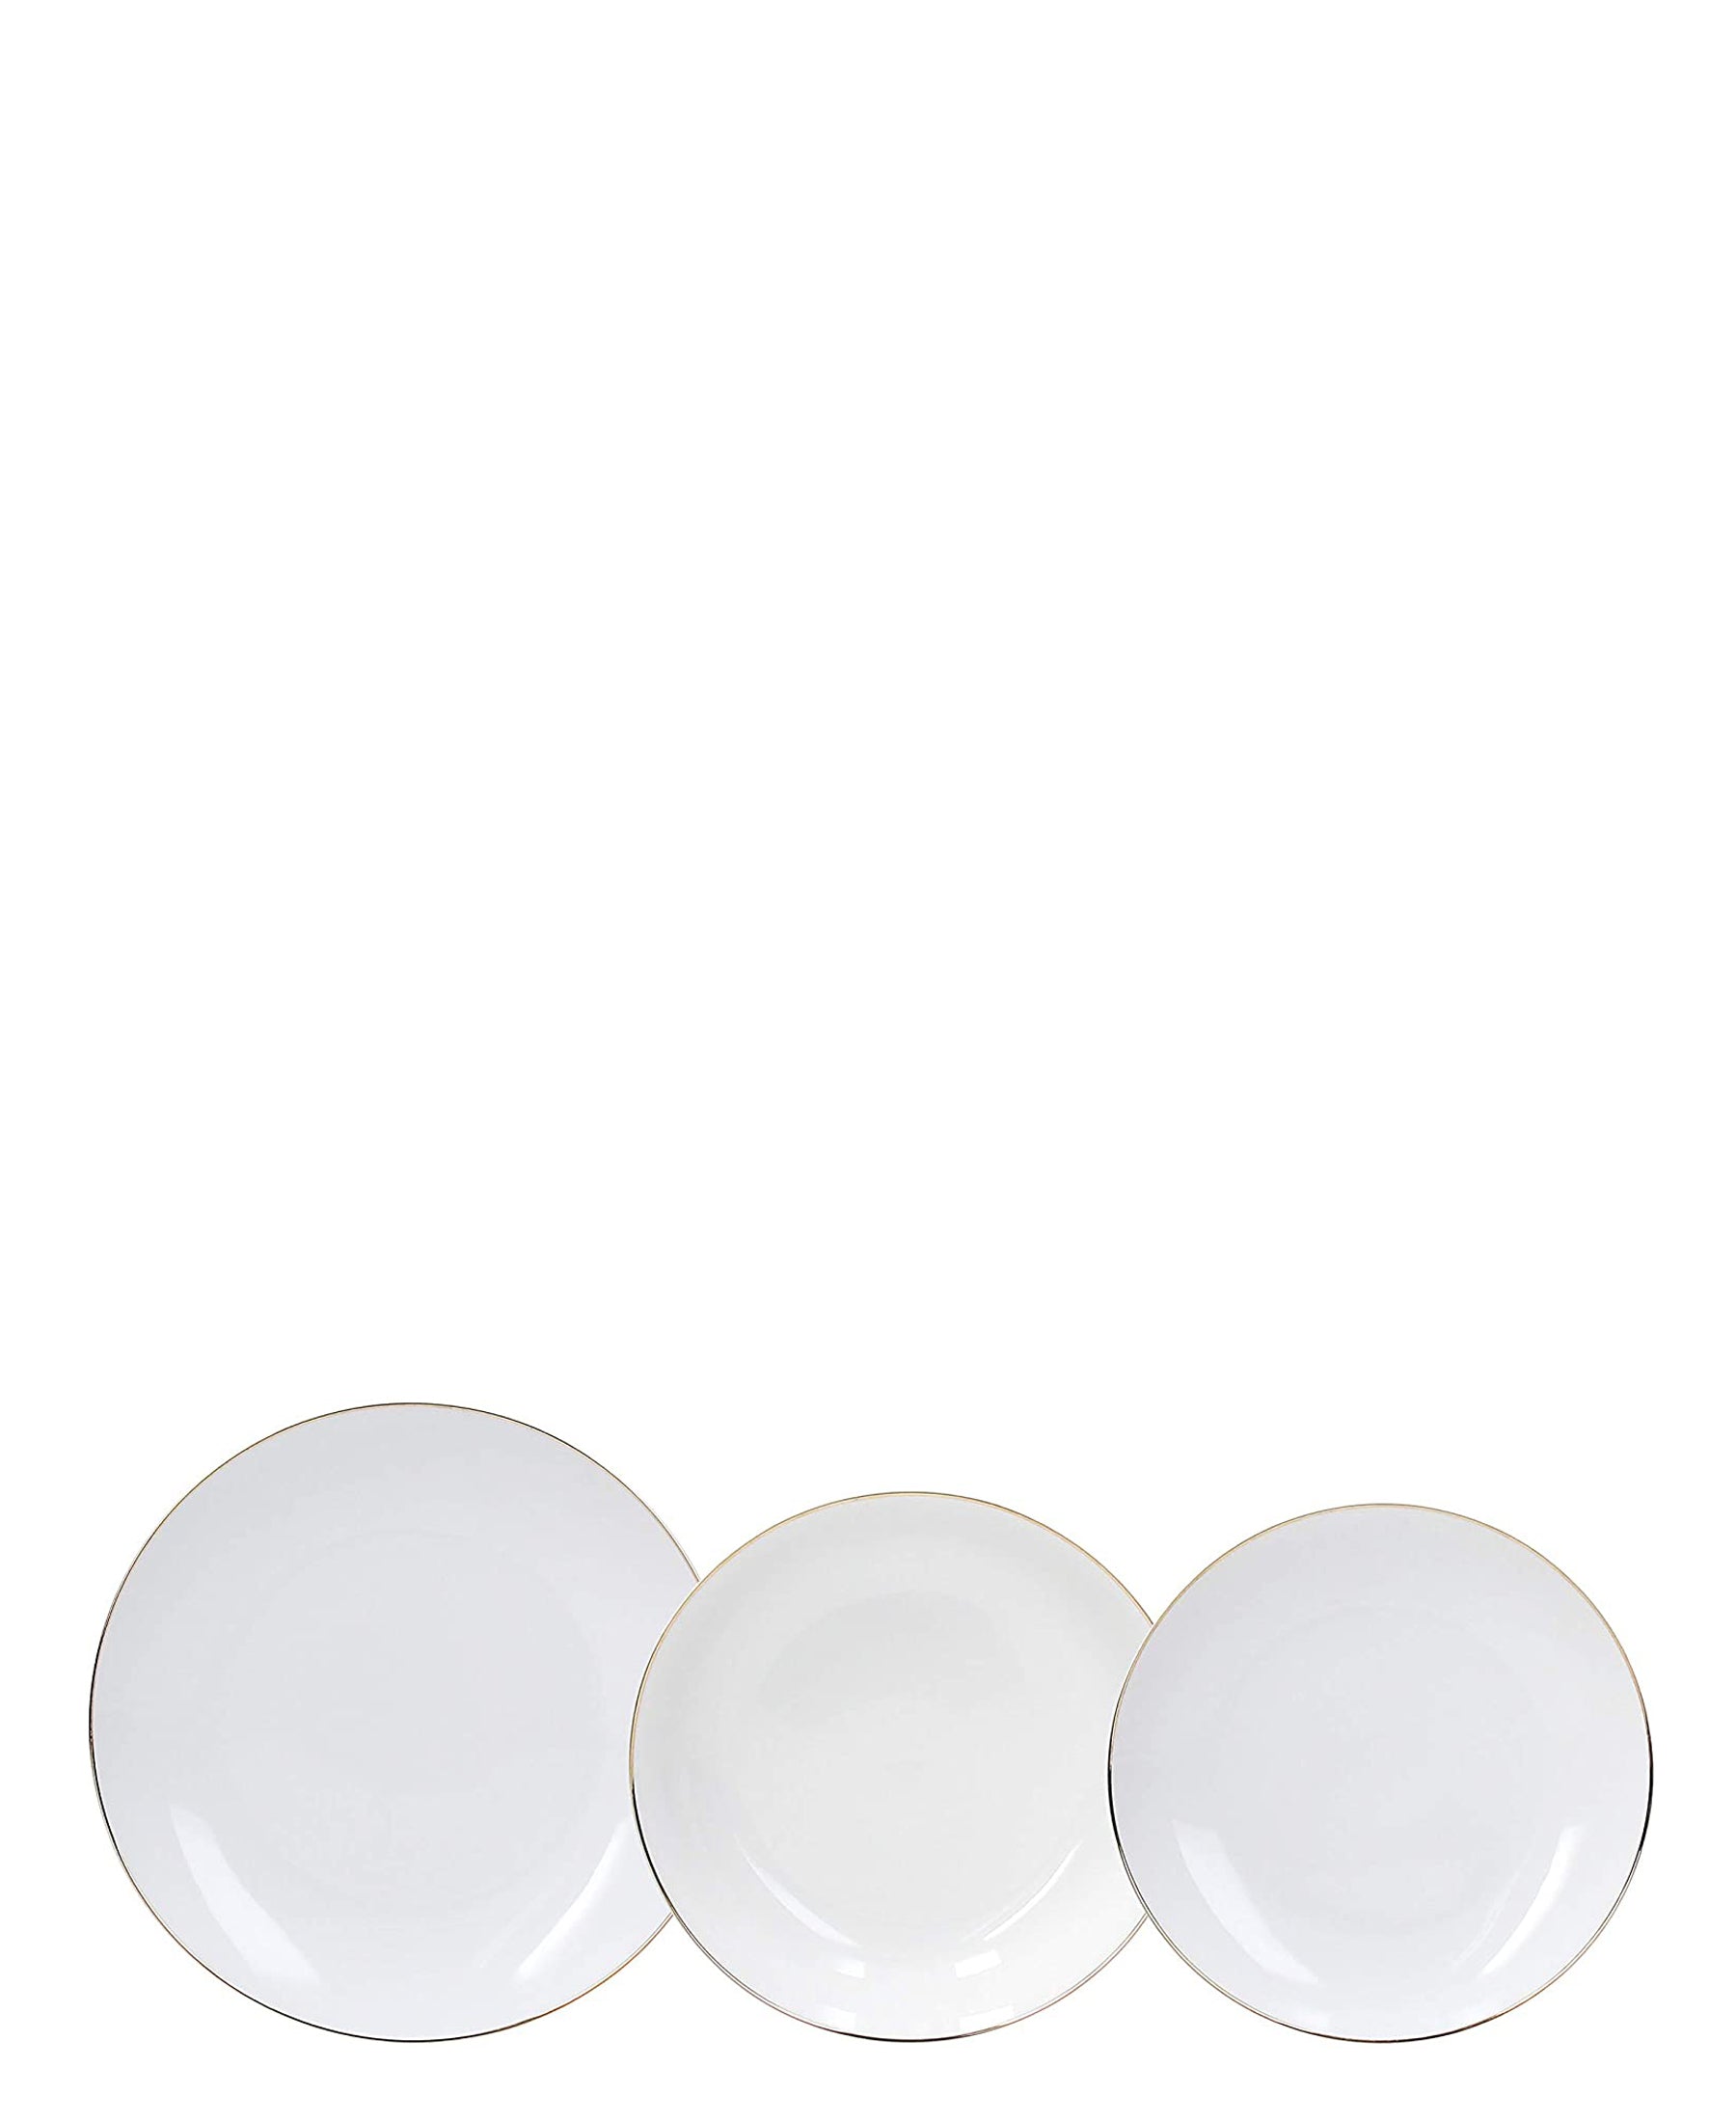 Tognana Fascetta Oro 18 Piece Dinner Set - White And Gold